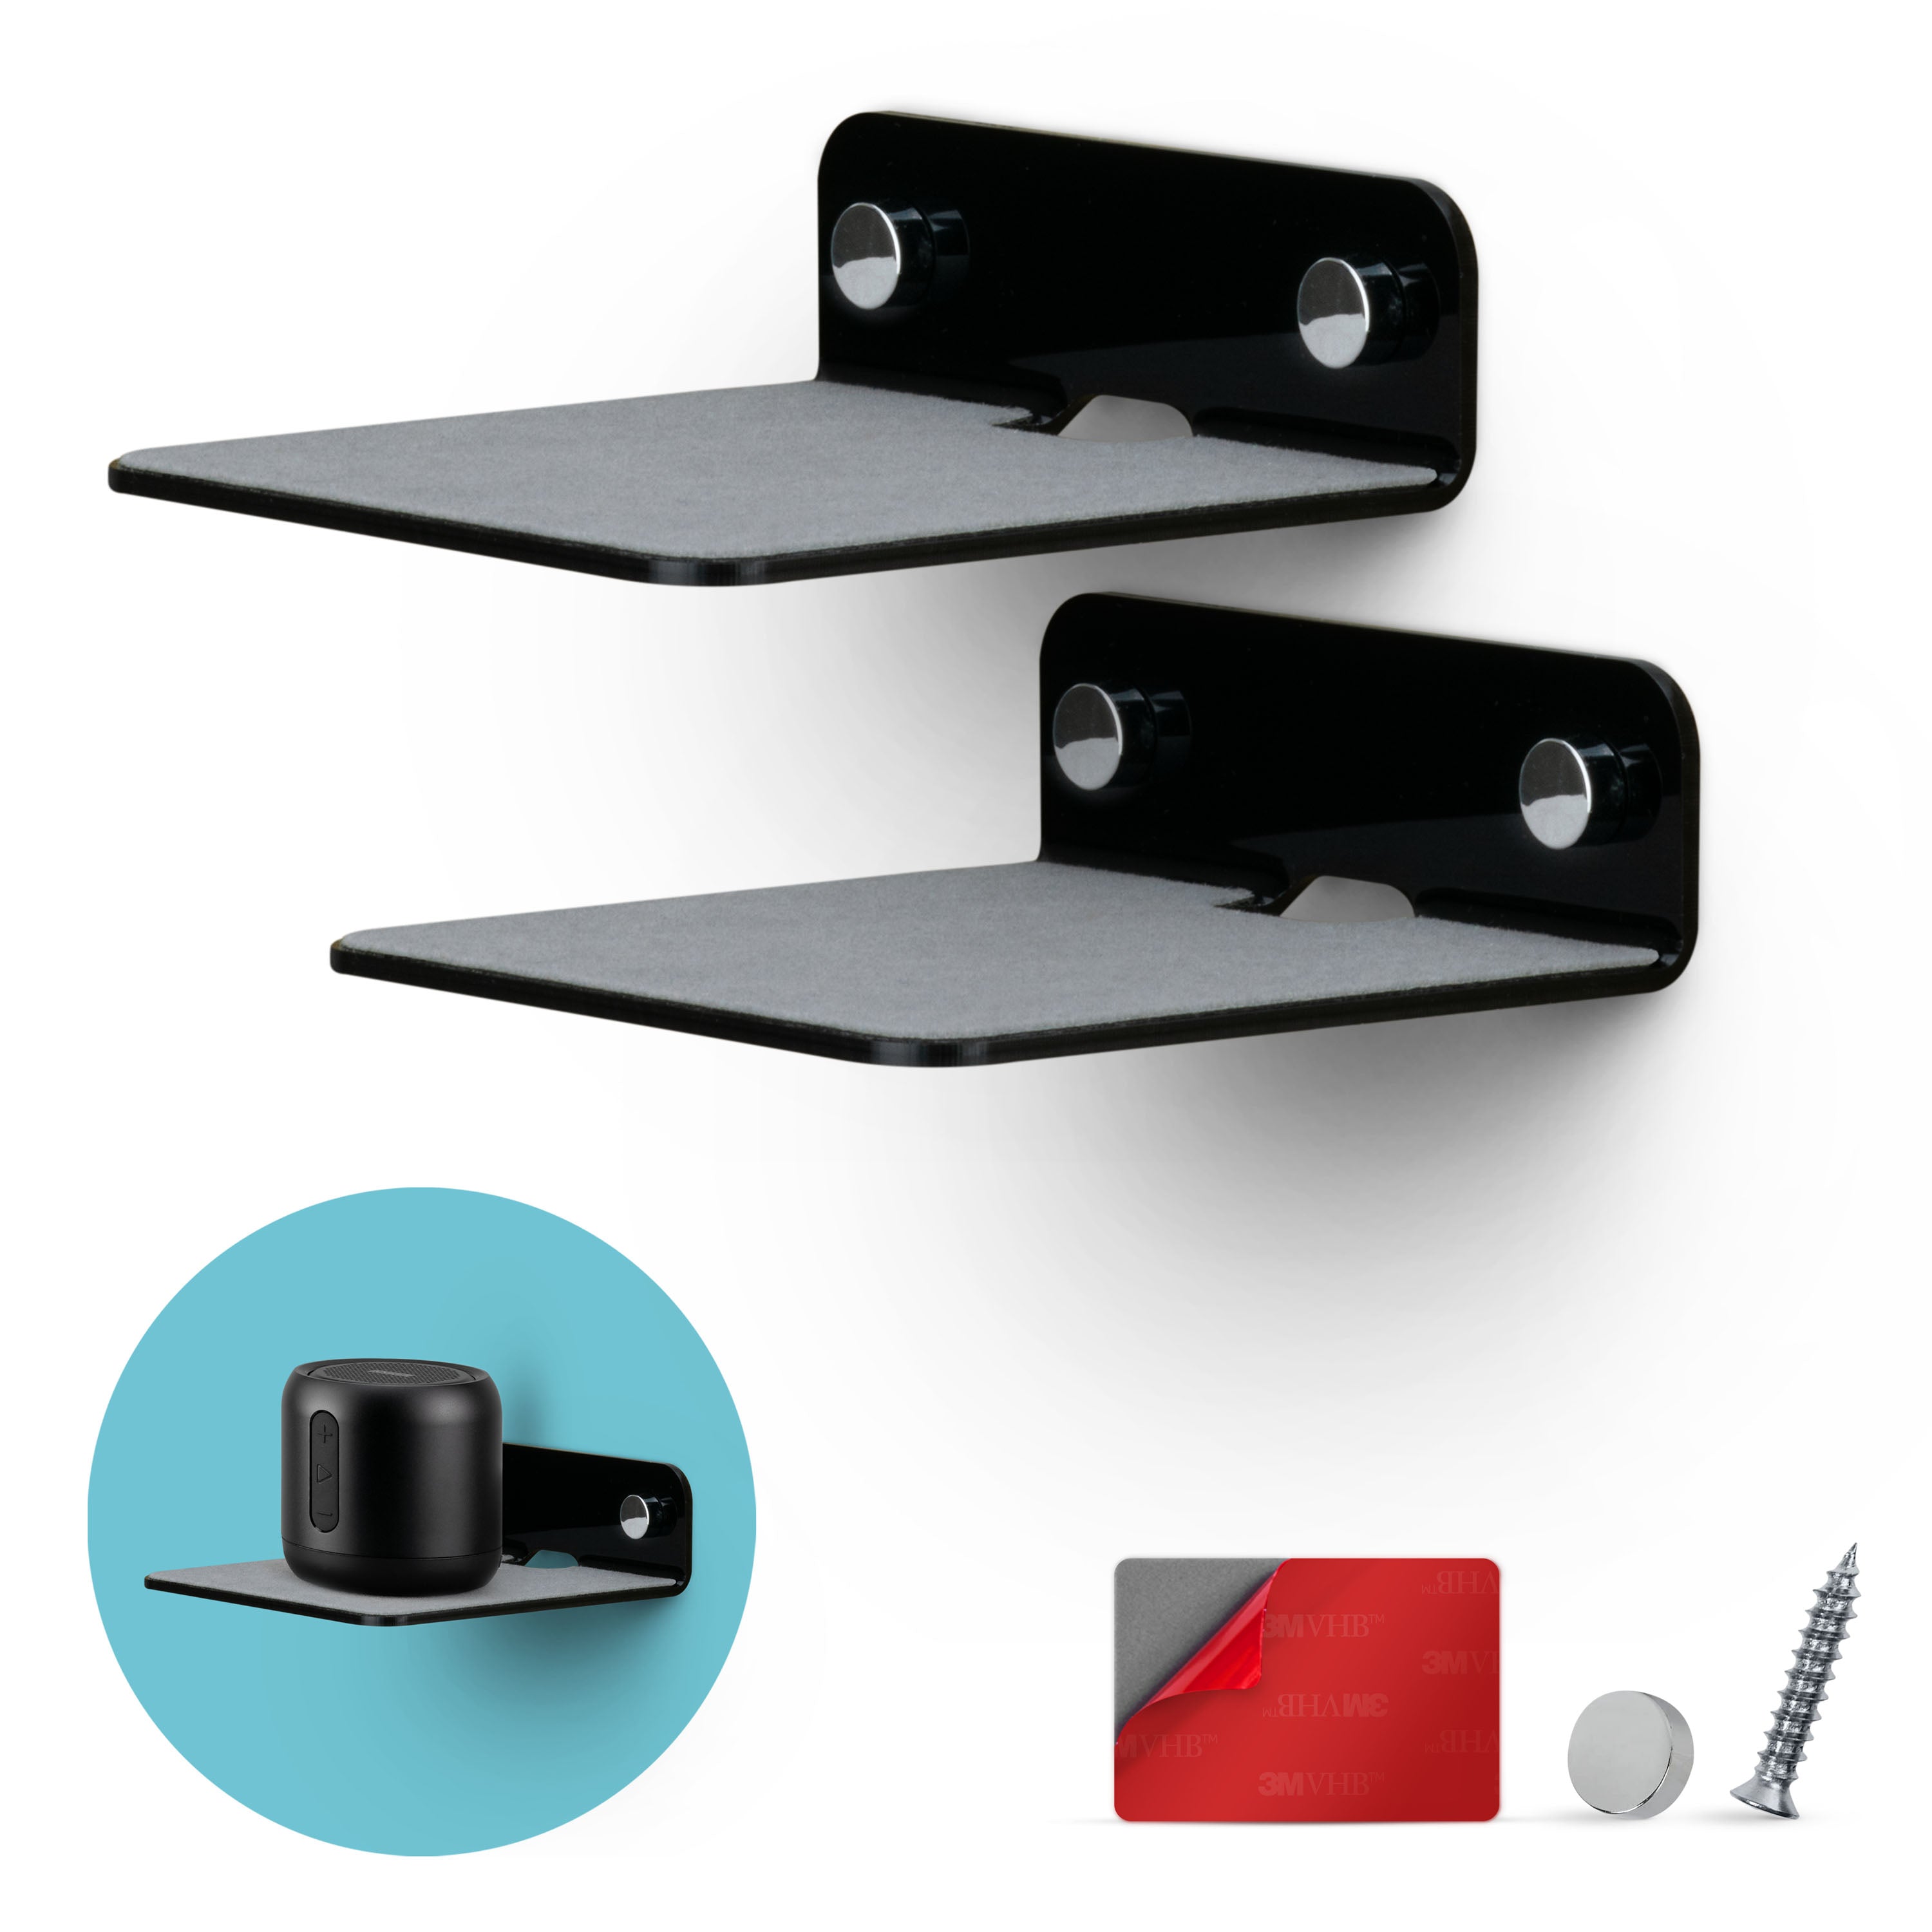 No-Drill, Self-Adhesive Floating Bathroom Shelves Wall Mounted [2 Pack]